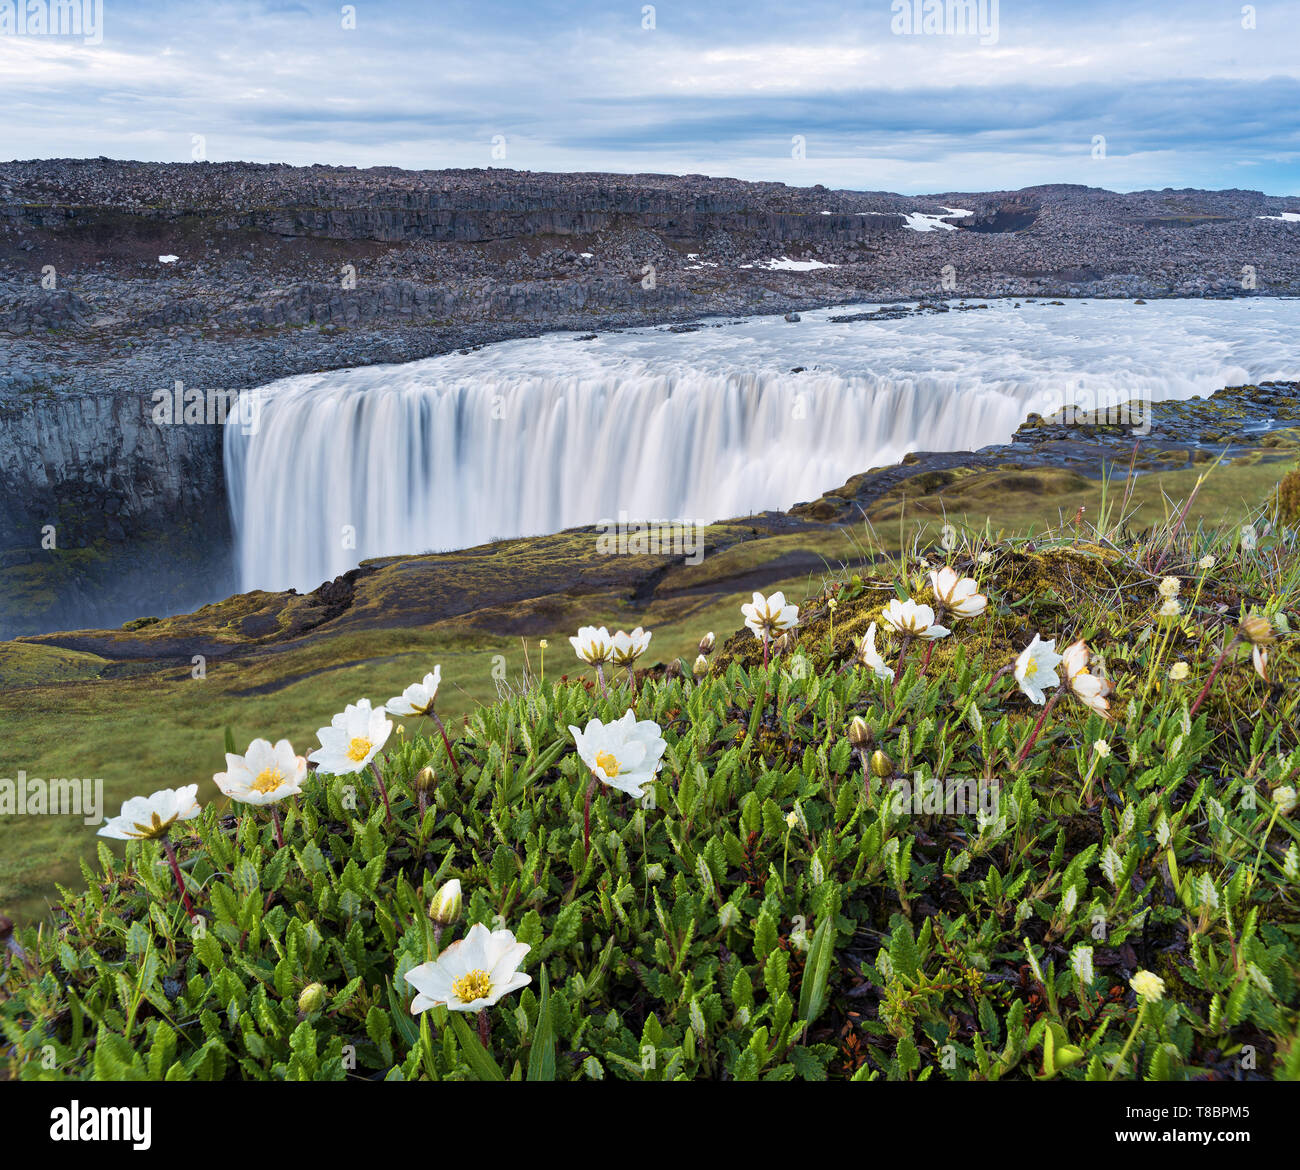 Dettifoss Waterfall, Iceland, Europe. Summer landscape with river and canyon. White flowers in the foreground. Beauty in nature Stock Photo